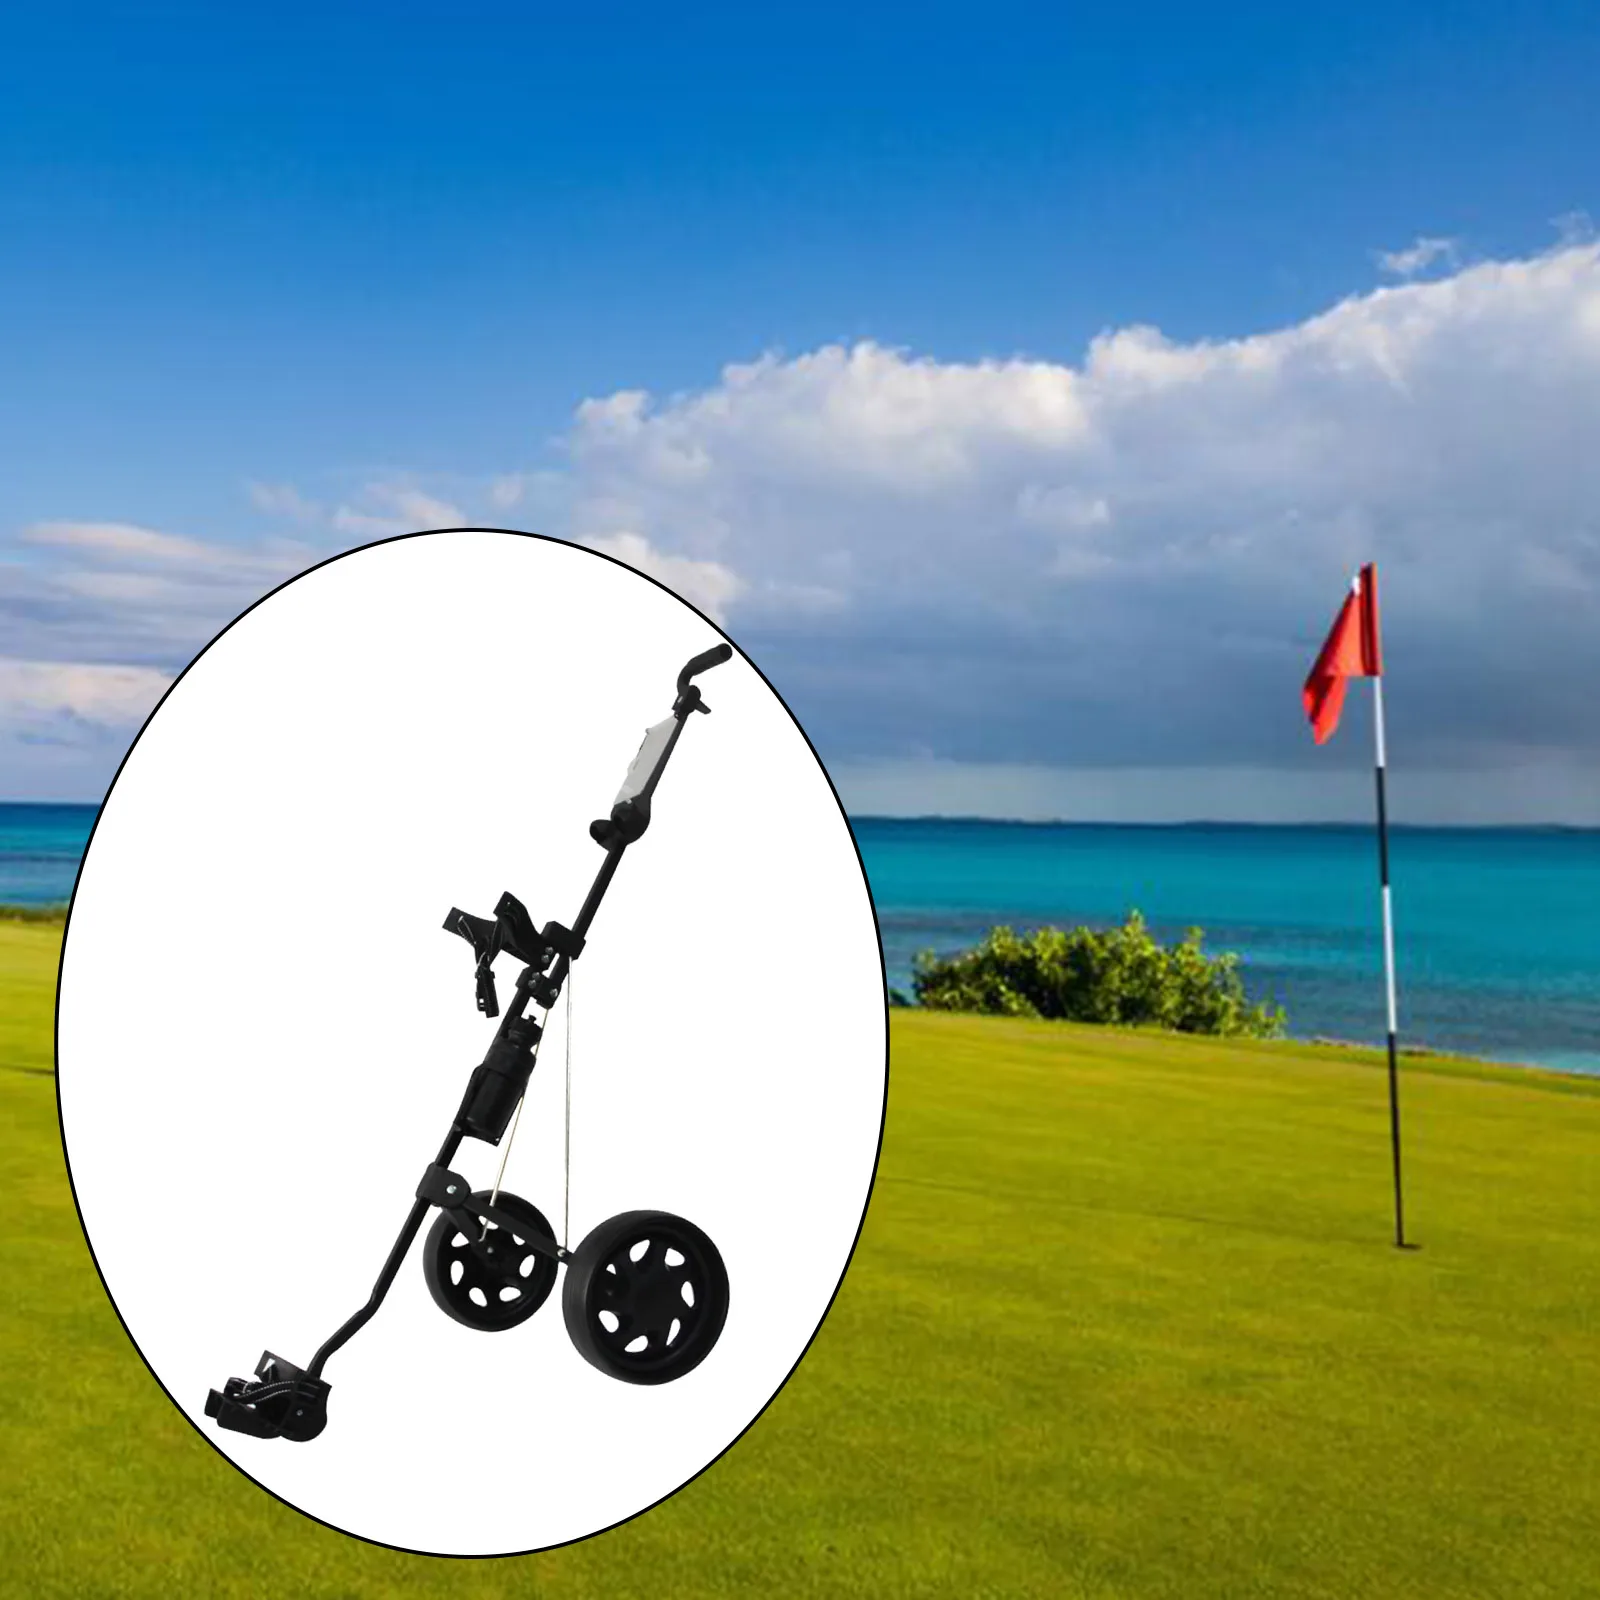 Golf Push Cart Swivel Foldable 2 Wheels Pull Cart Golf Trolley with Scorecard Stand Bottle Cages Golf Cart Bag Carrier